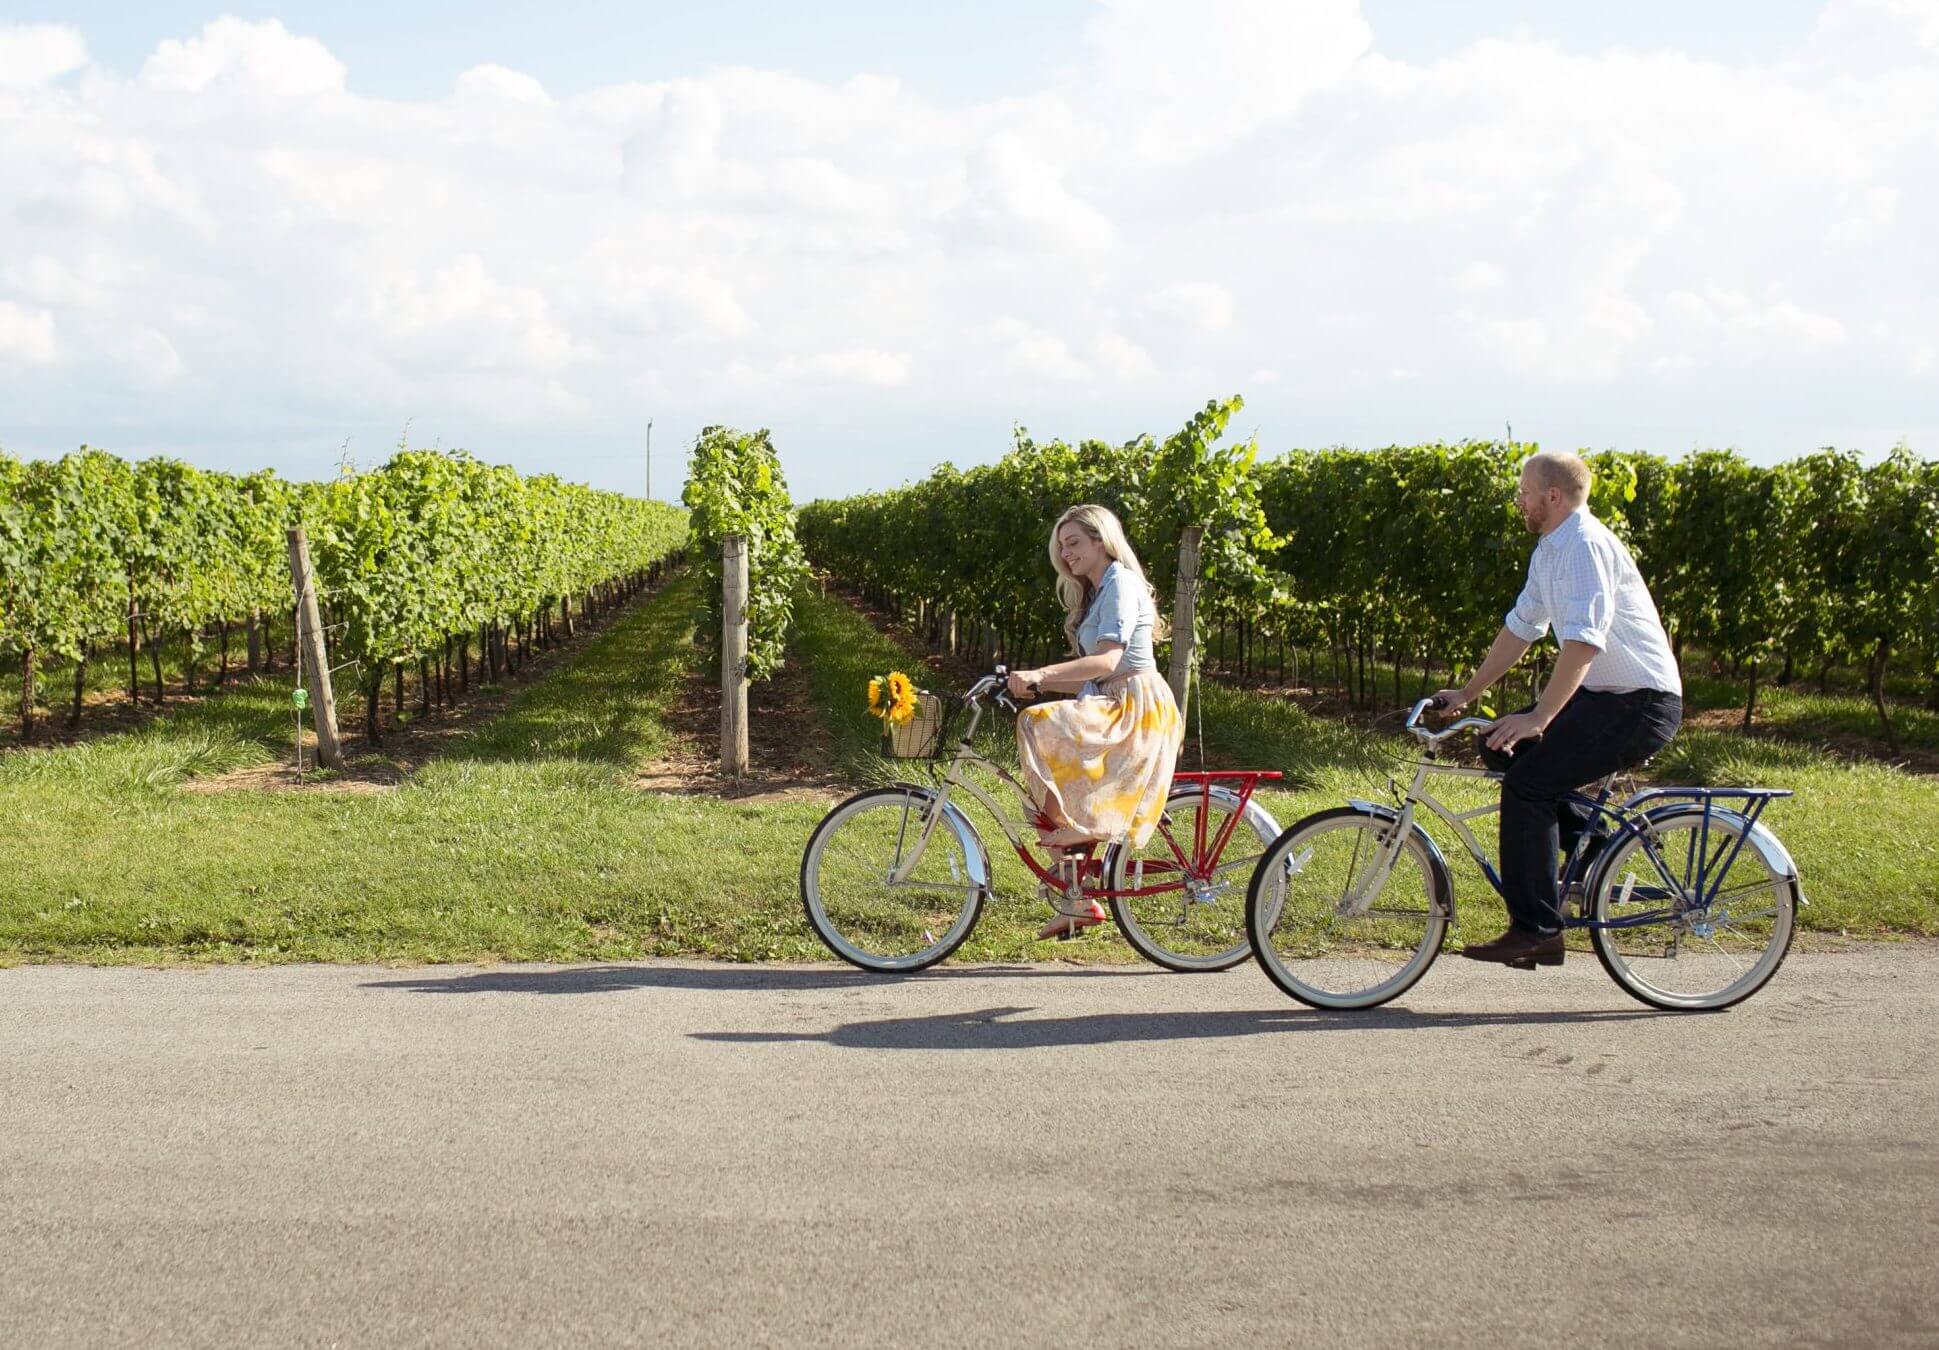 A young woman rides a bicycle with a vineyard in the background